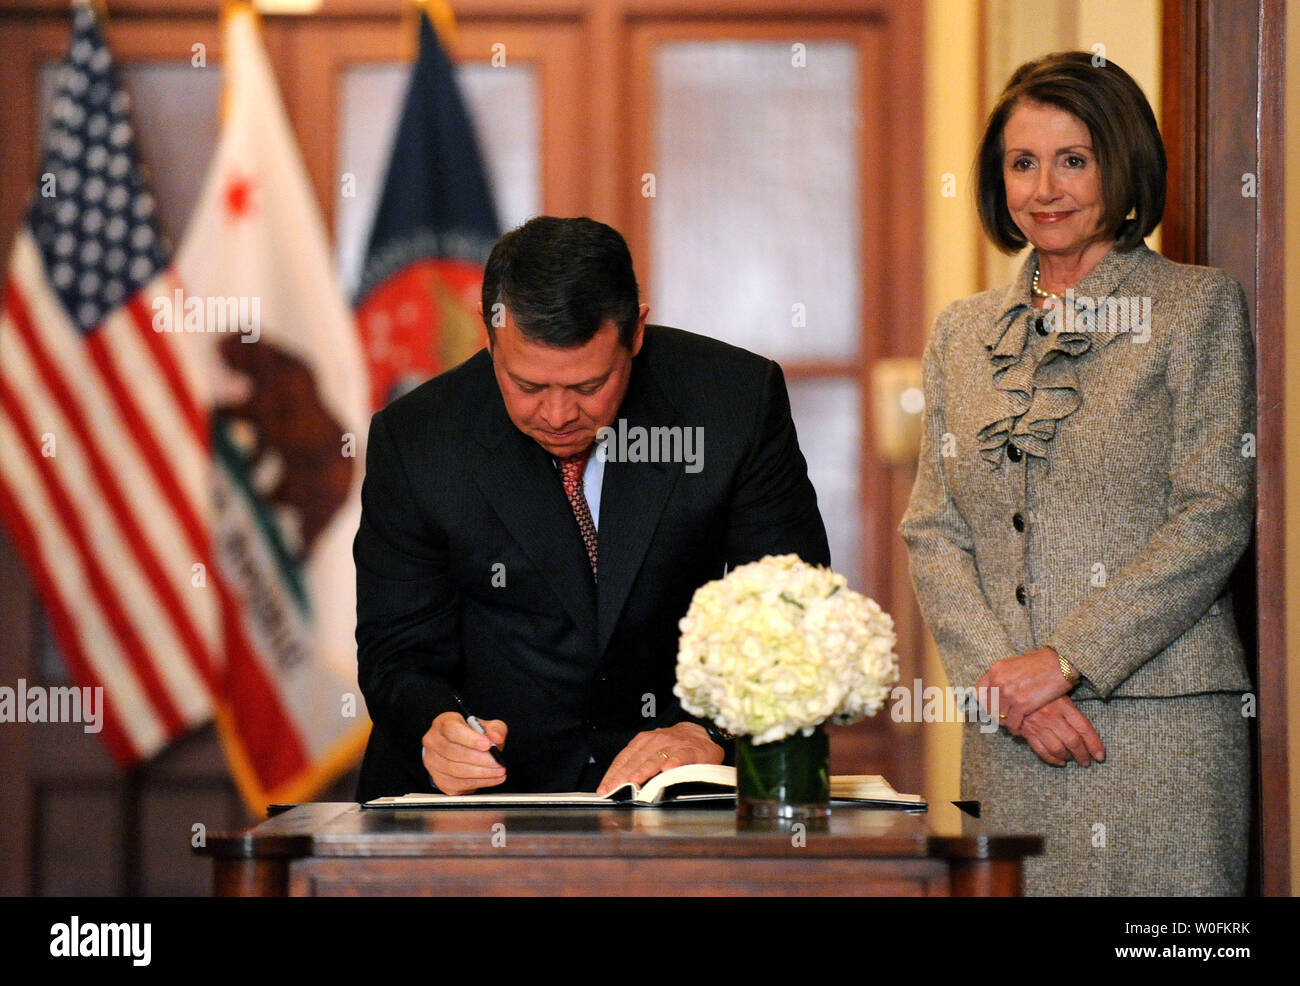 King Abdullah II of Jordan signs a guest book as Speaker of the House Nancy Pelosi watches, prior to their meeting on Capitol Hill in Washington on April 14, 2010.  UPI/Kevin Dietsch Stock Photo